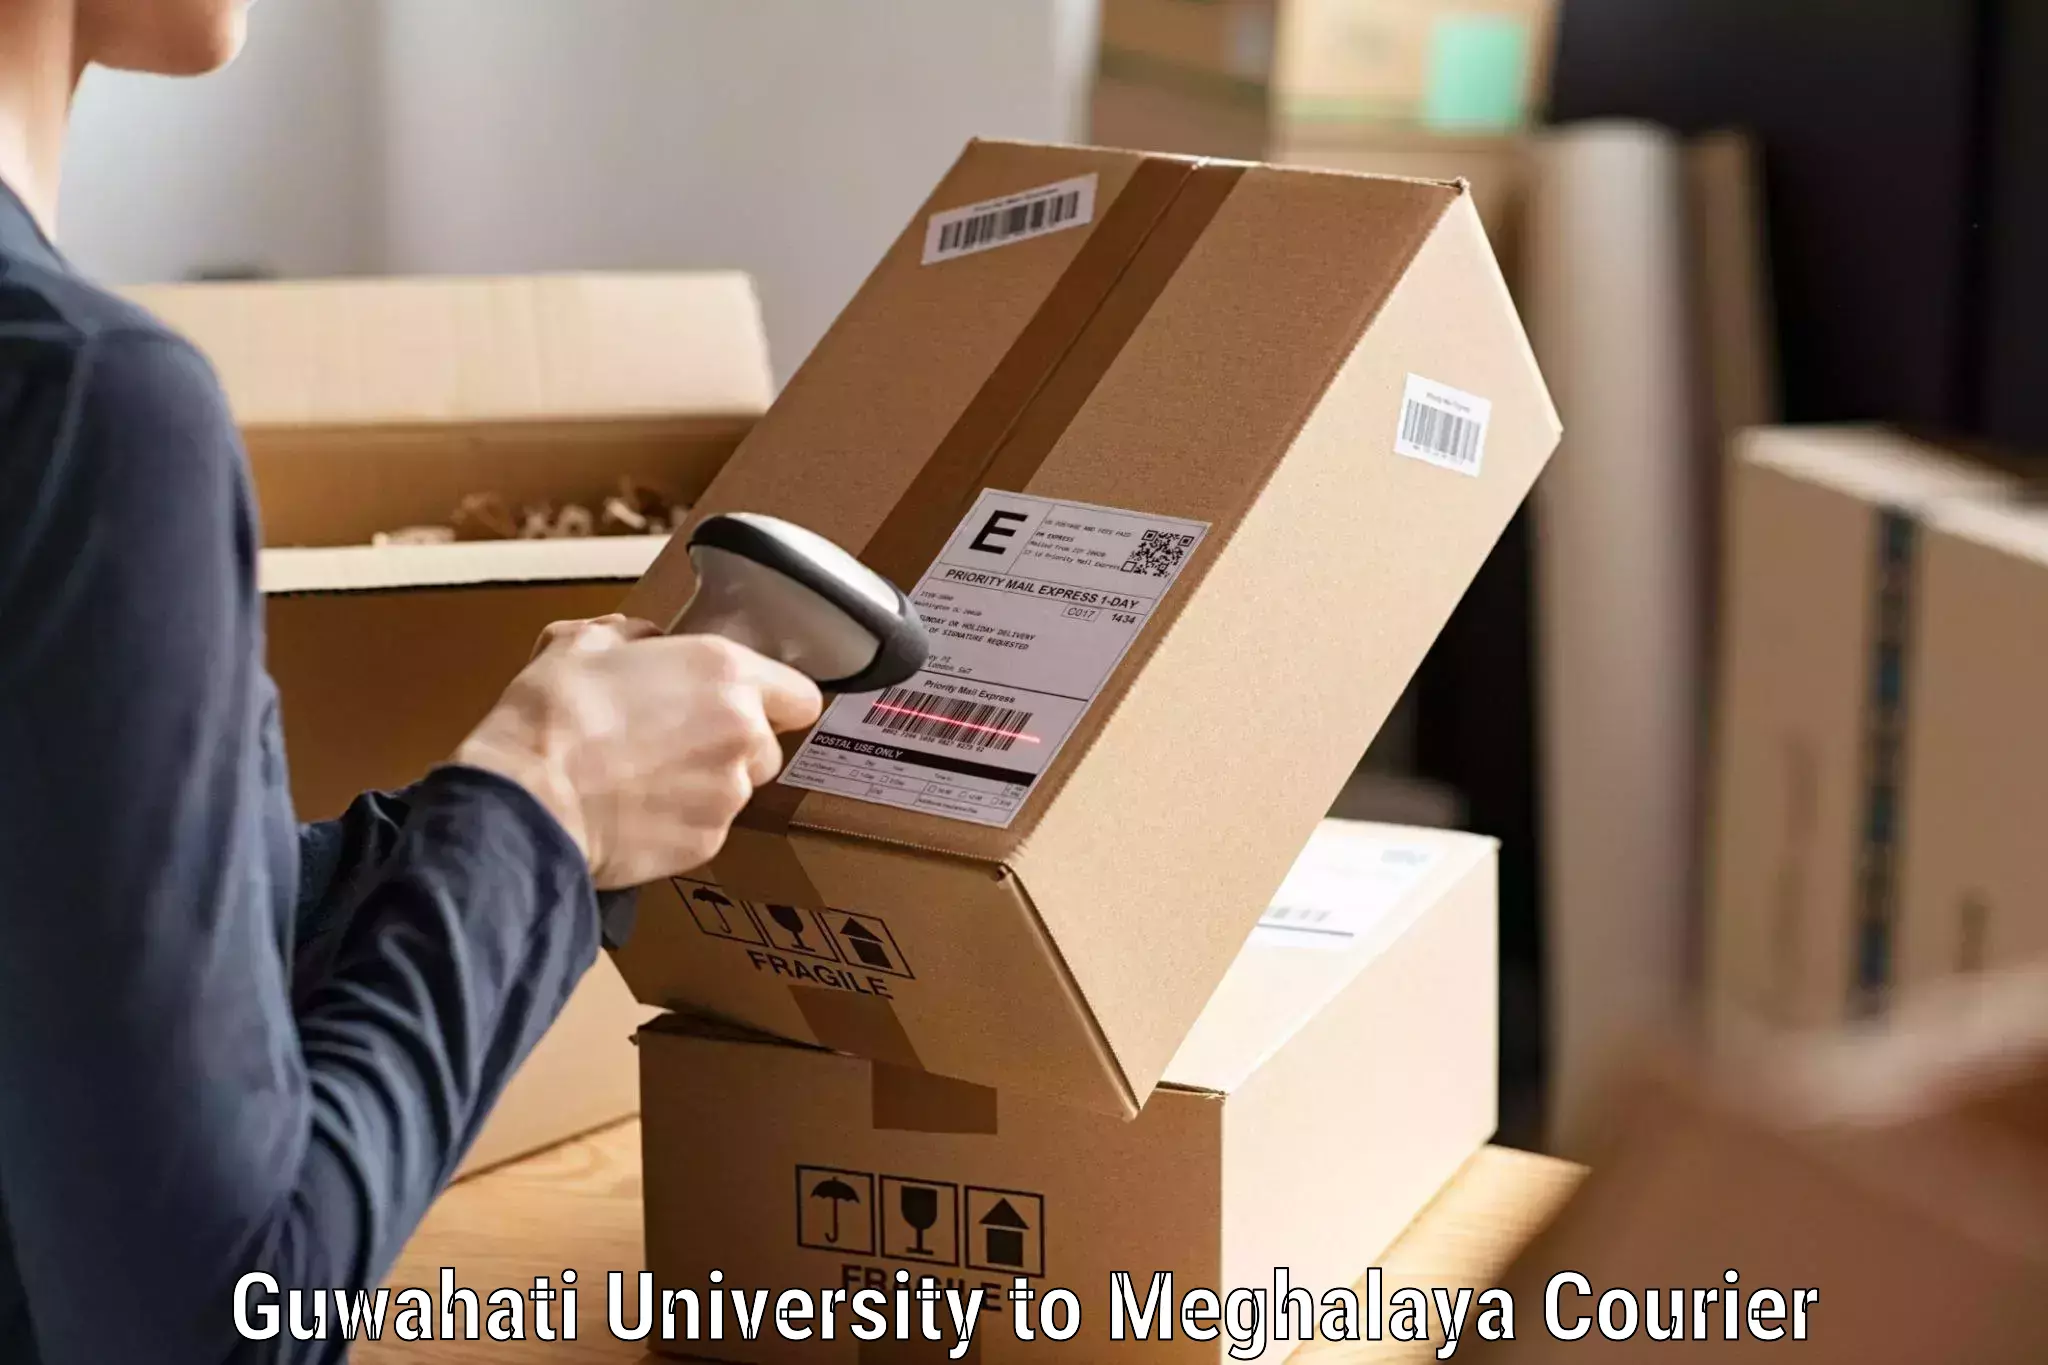 Secure package delivery in Guwahati University to Shillong